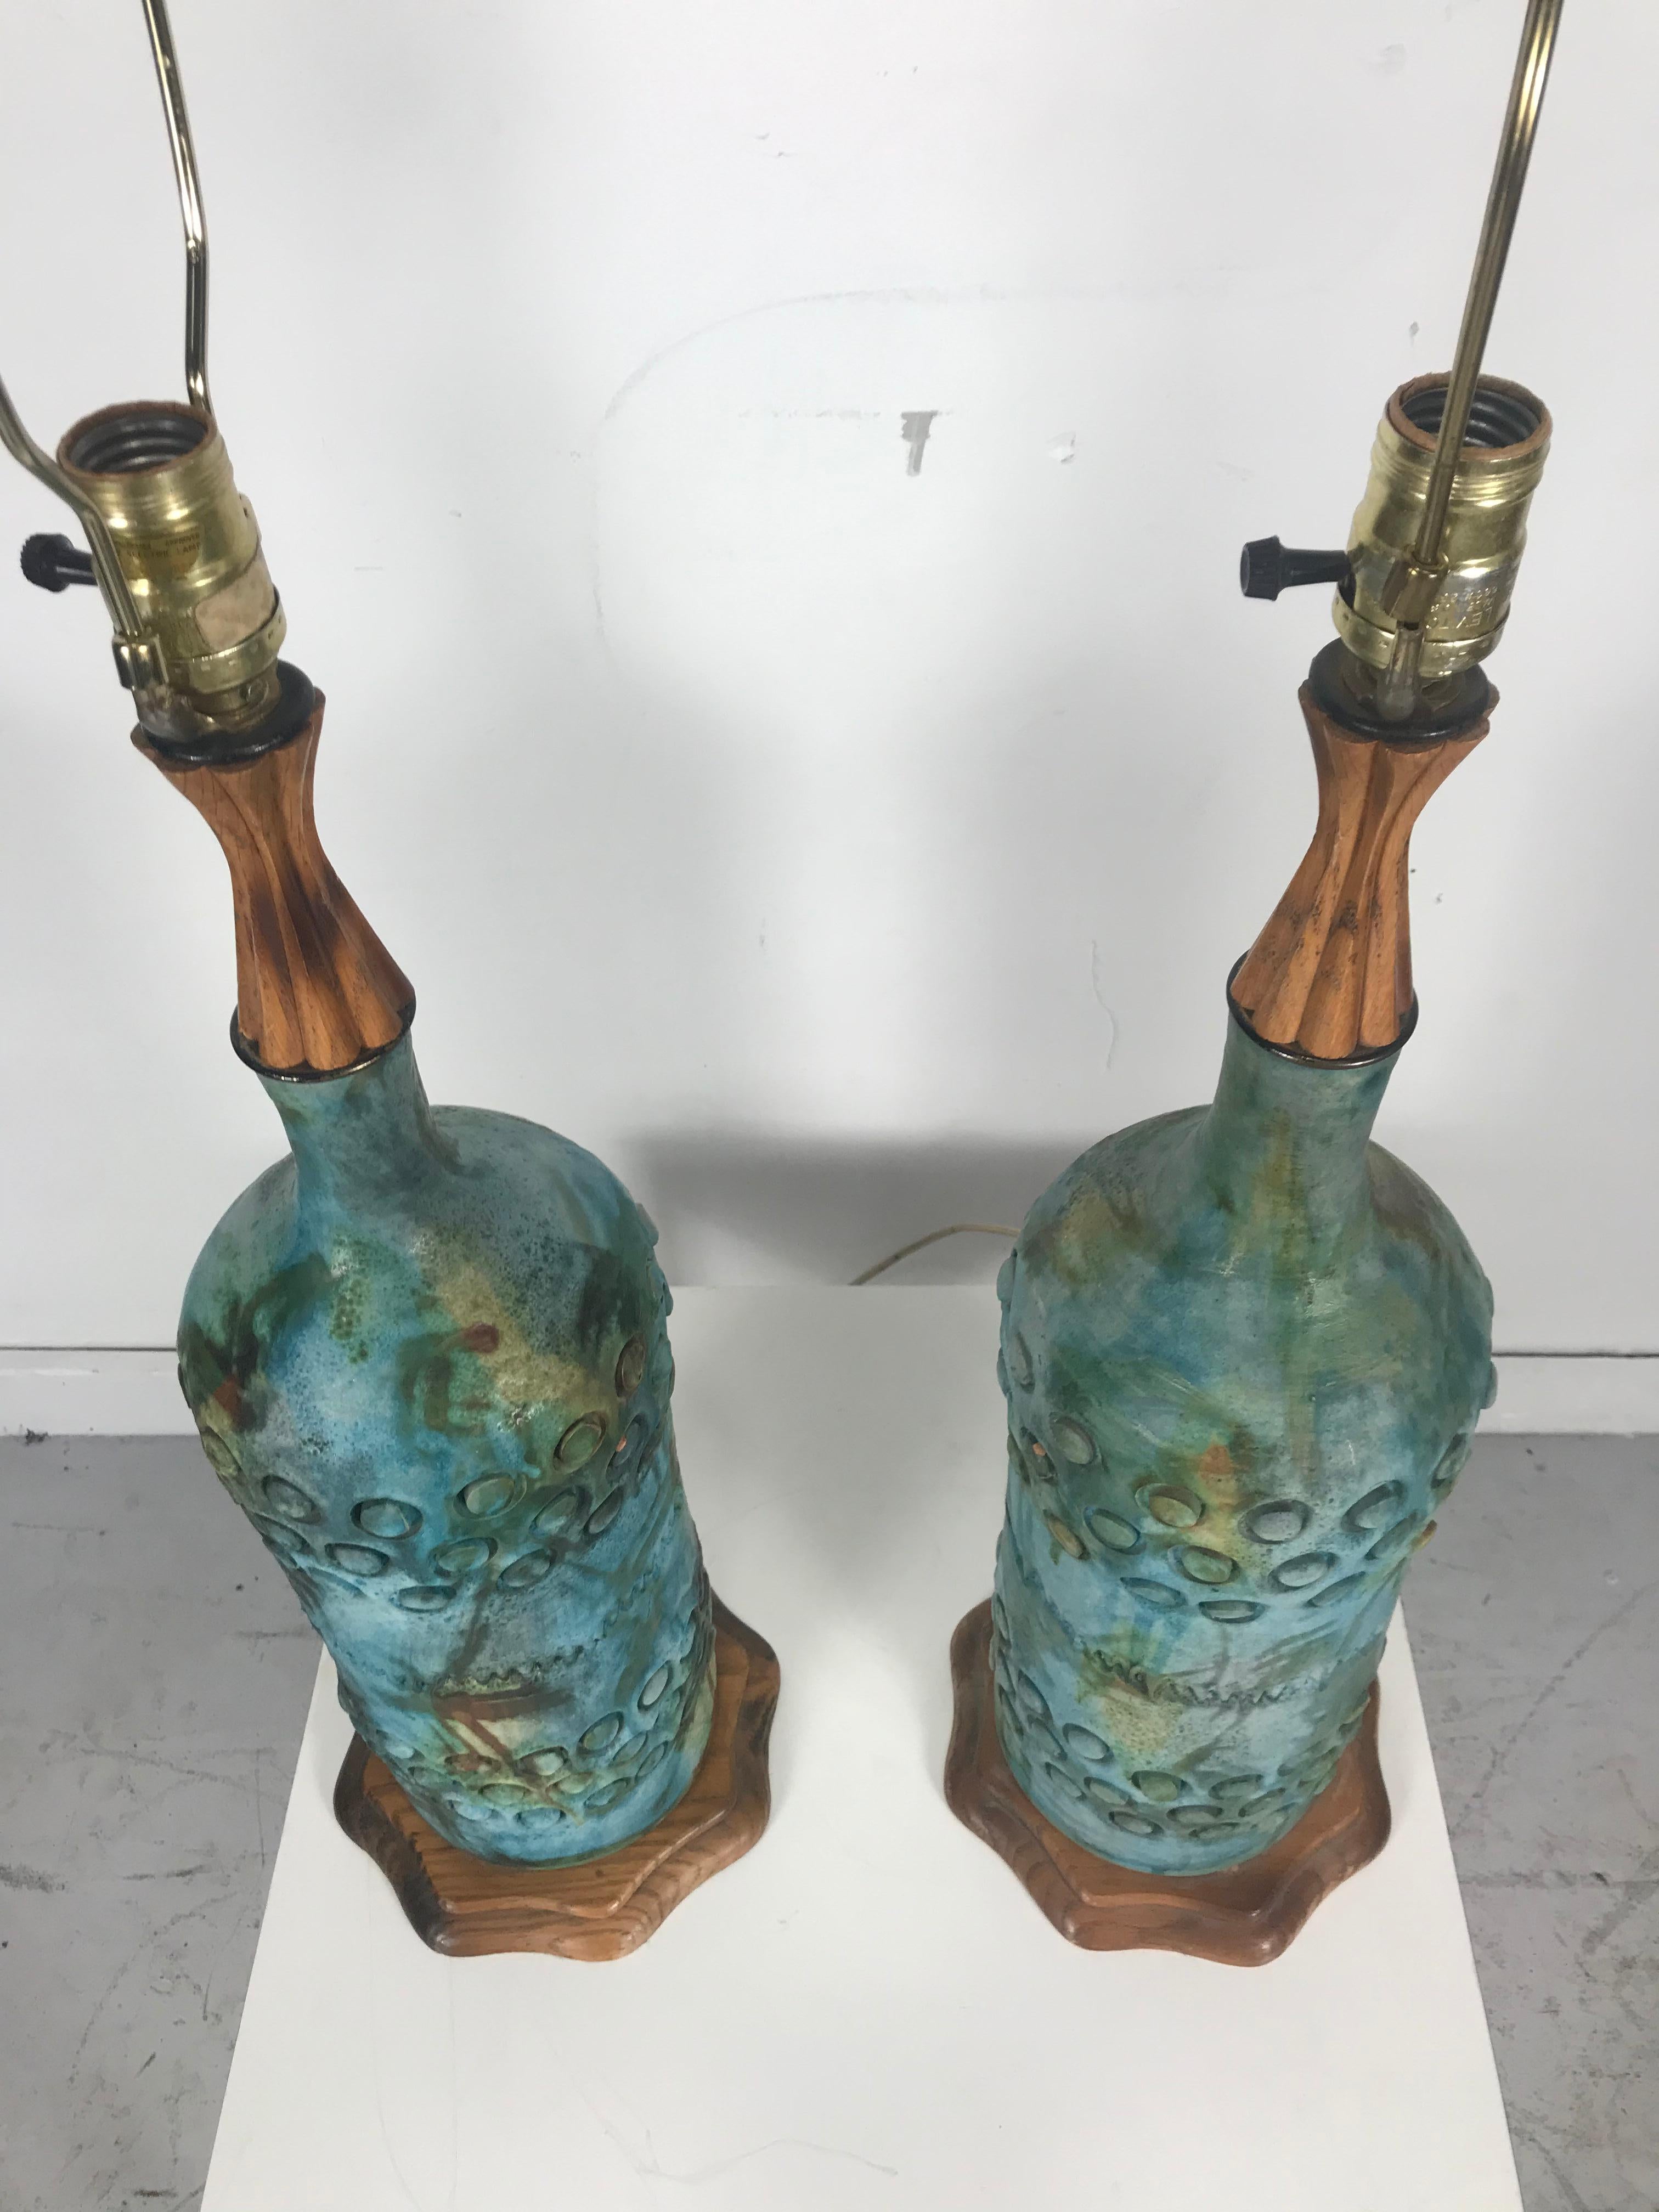 Pair of Raymor Italian ceramic pottery lamps by Alvino Bagni. Unusual form, beautifully textured, glazed, carved wood detailing.